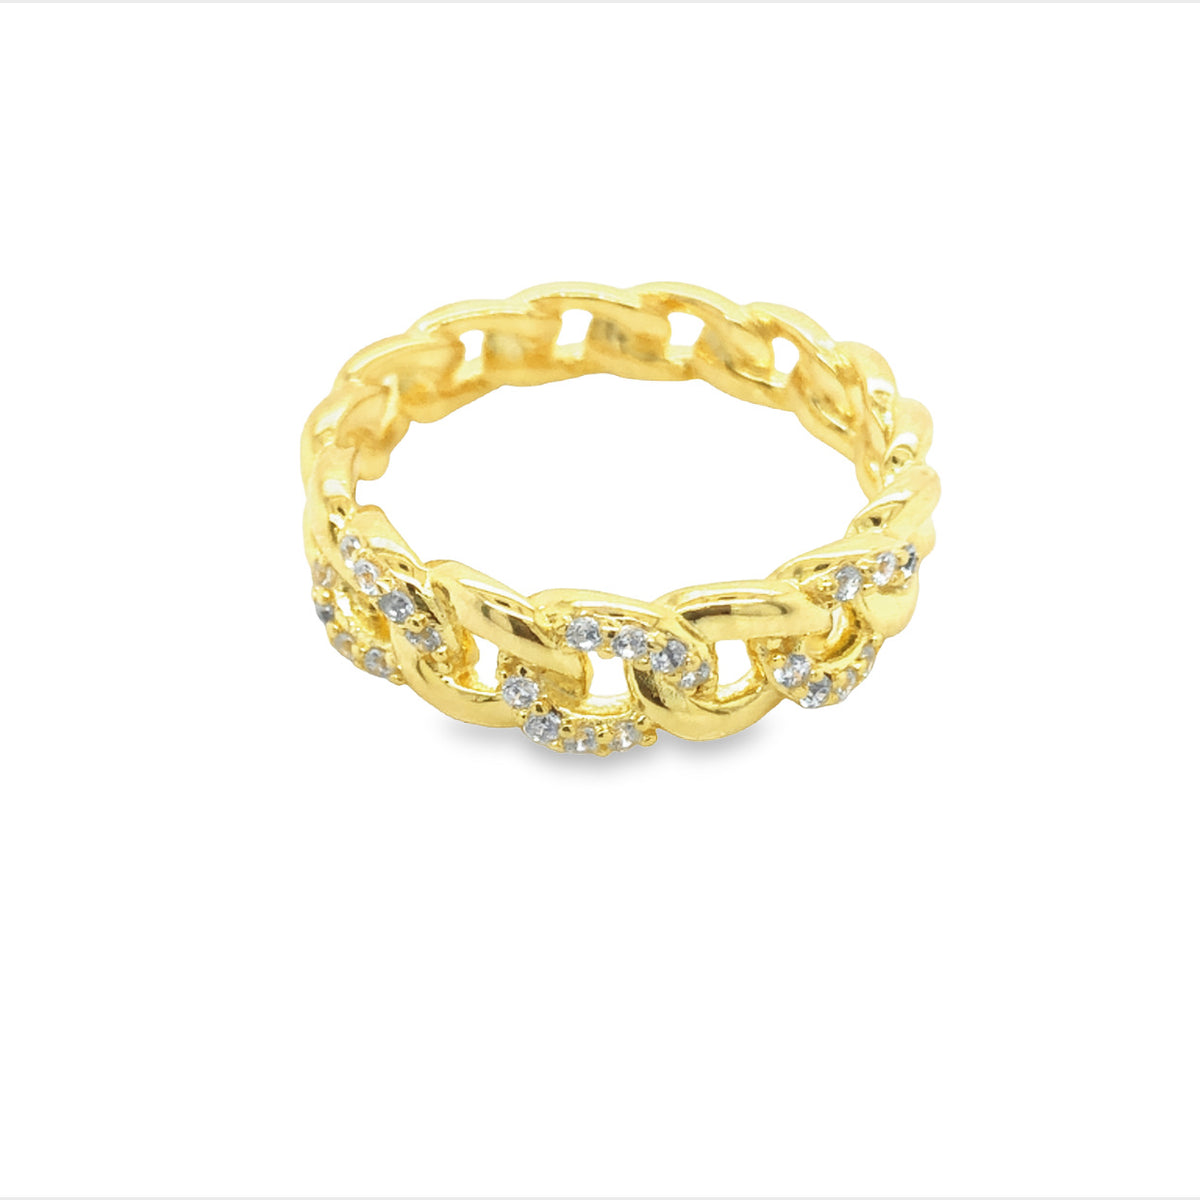 Olivia Sterling Silver Gold Plated Cz Set Chain Ring Size 7/N